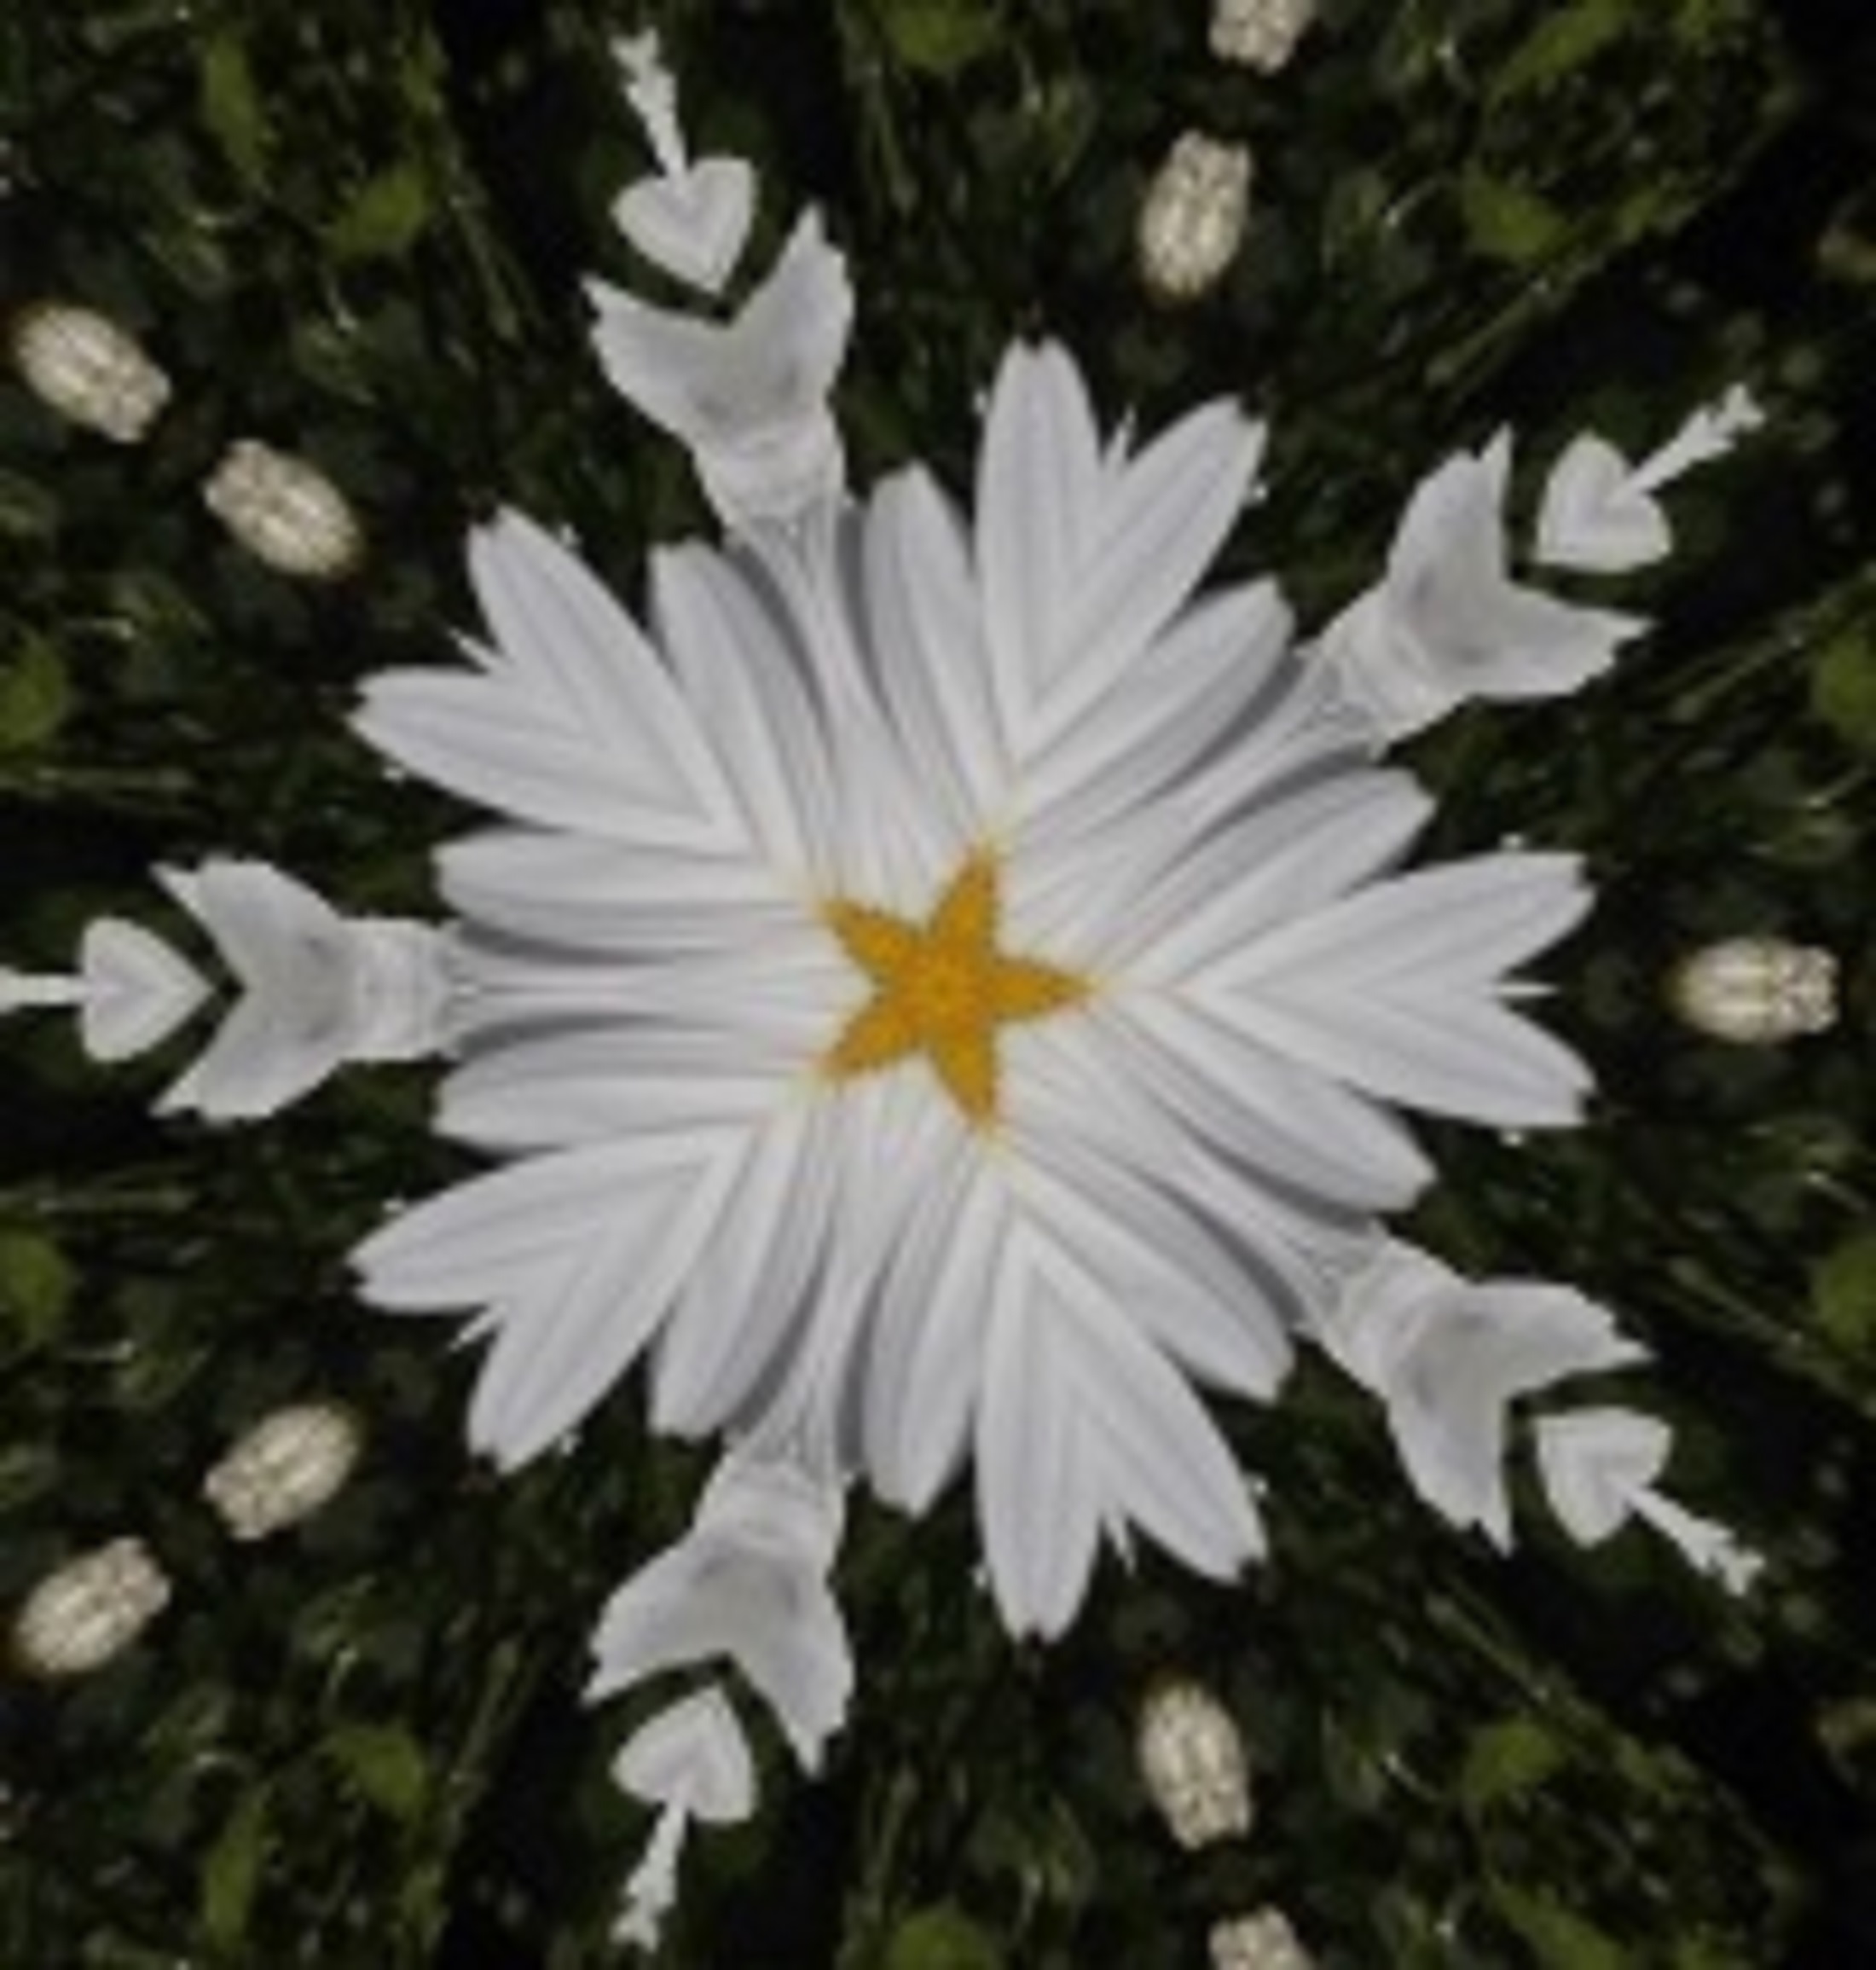 Daisies I took a photo of with  x5 kaleidoscope effect on LunaPic.com